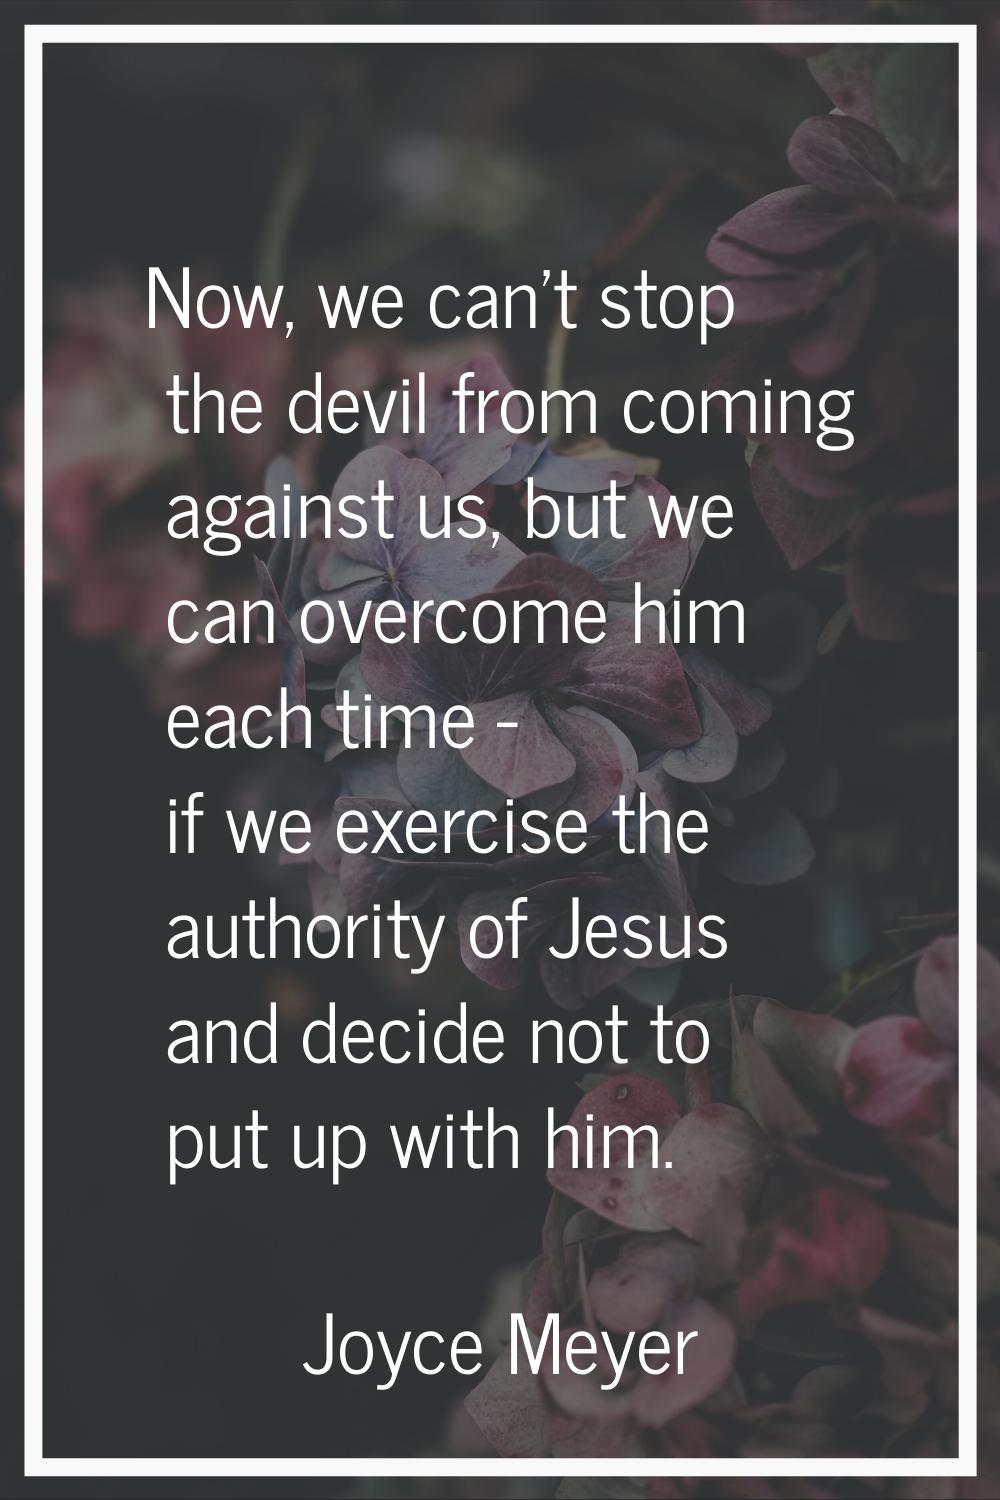 Now, we can't stop the devil from coming against us, but we can overcome him each time - if we exer